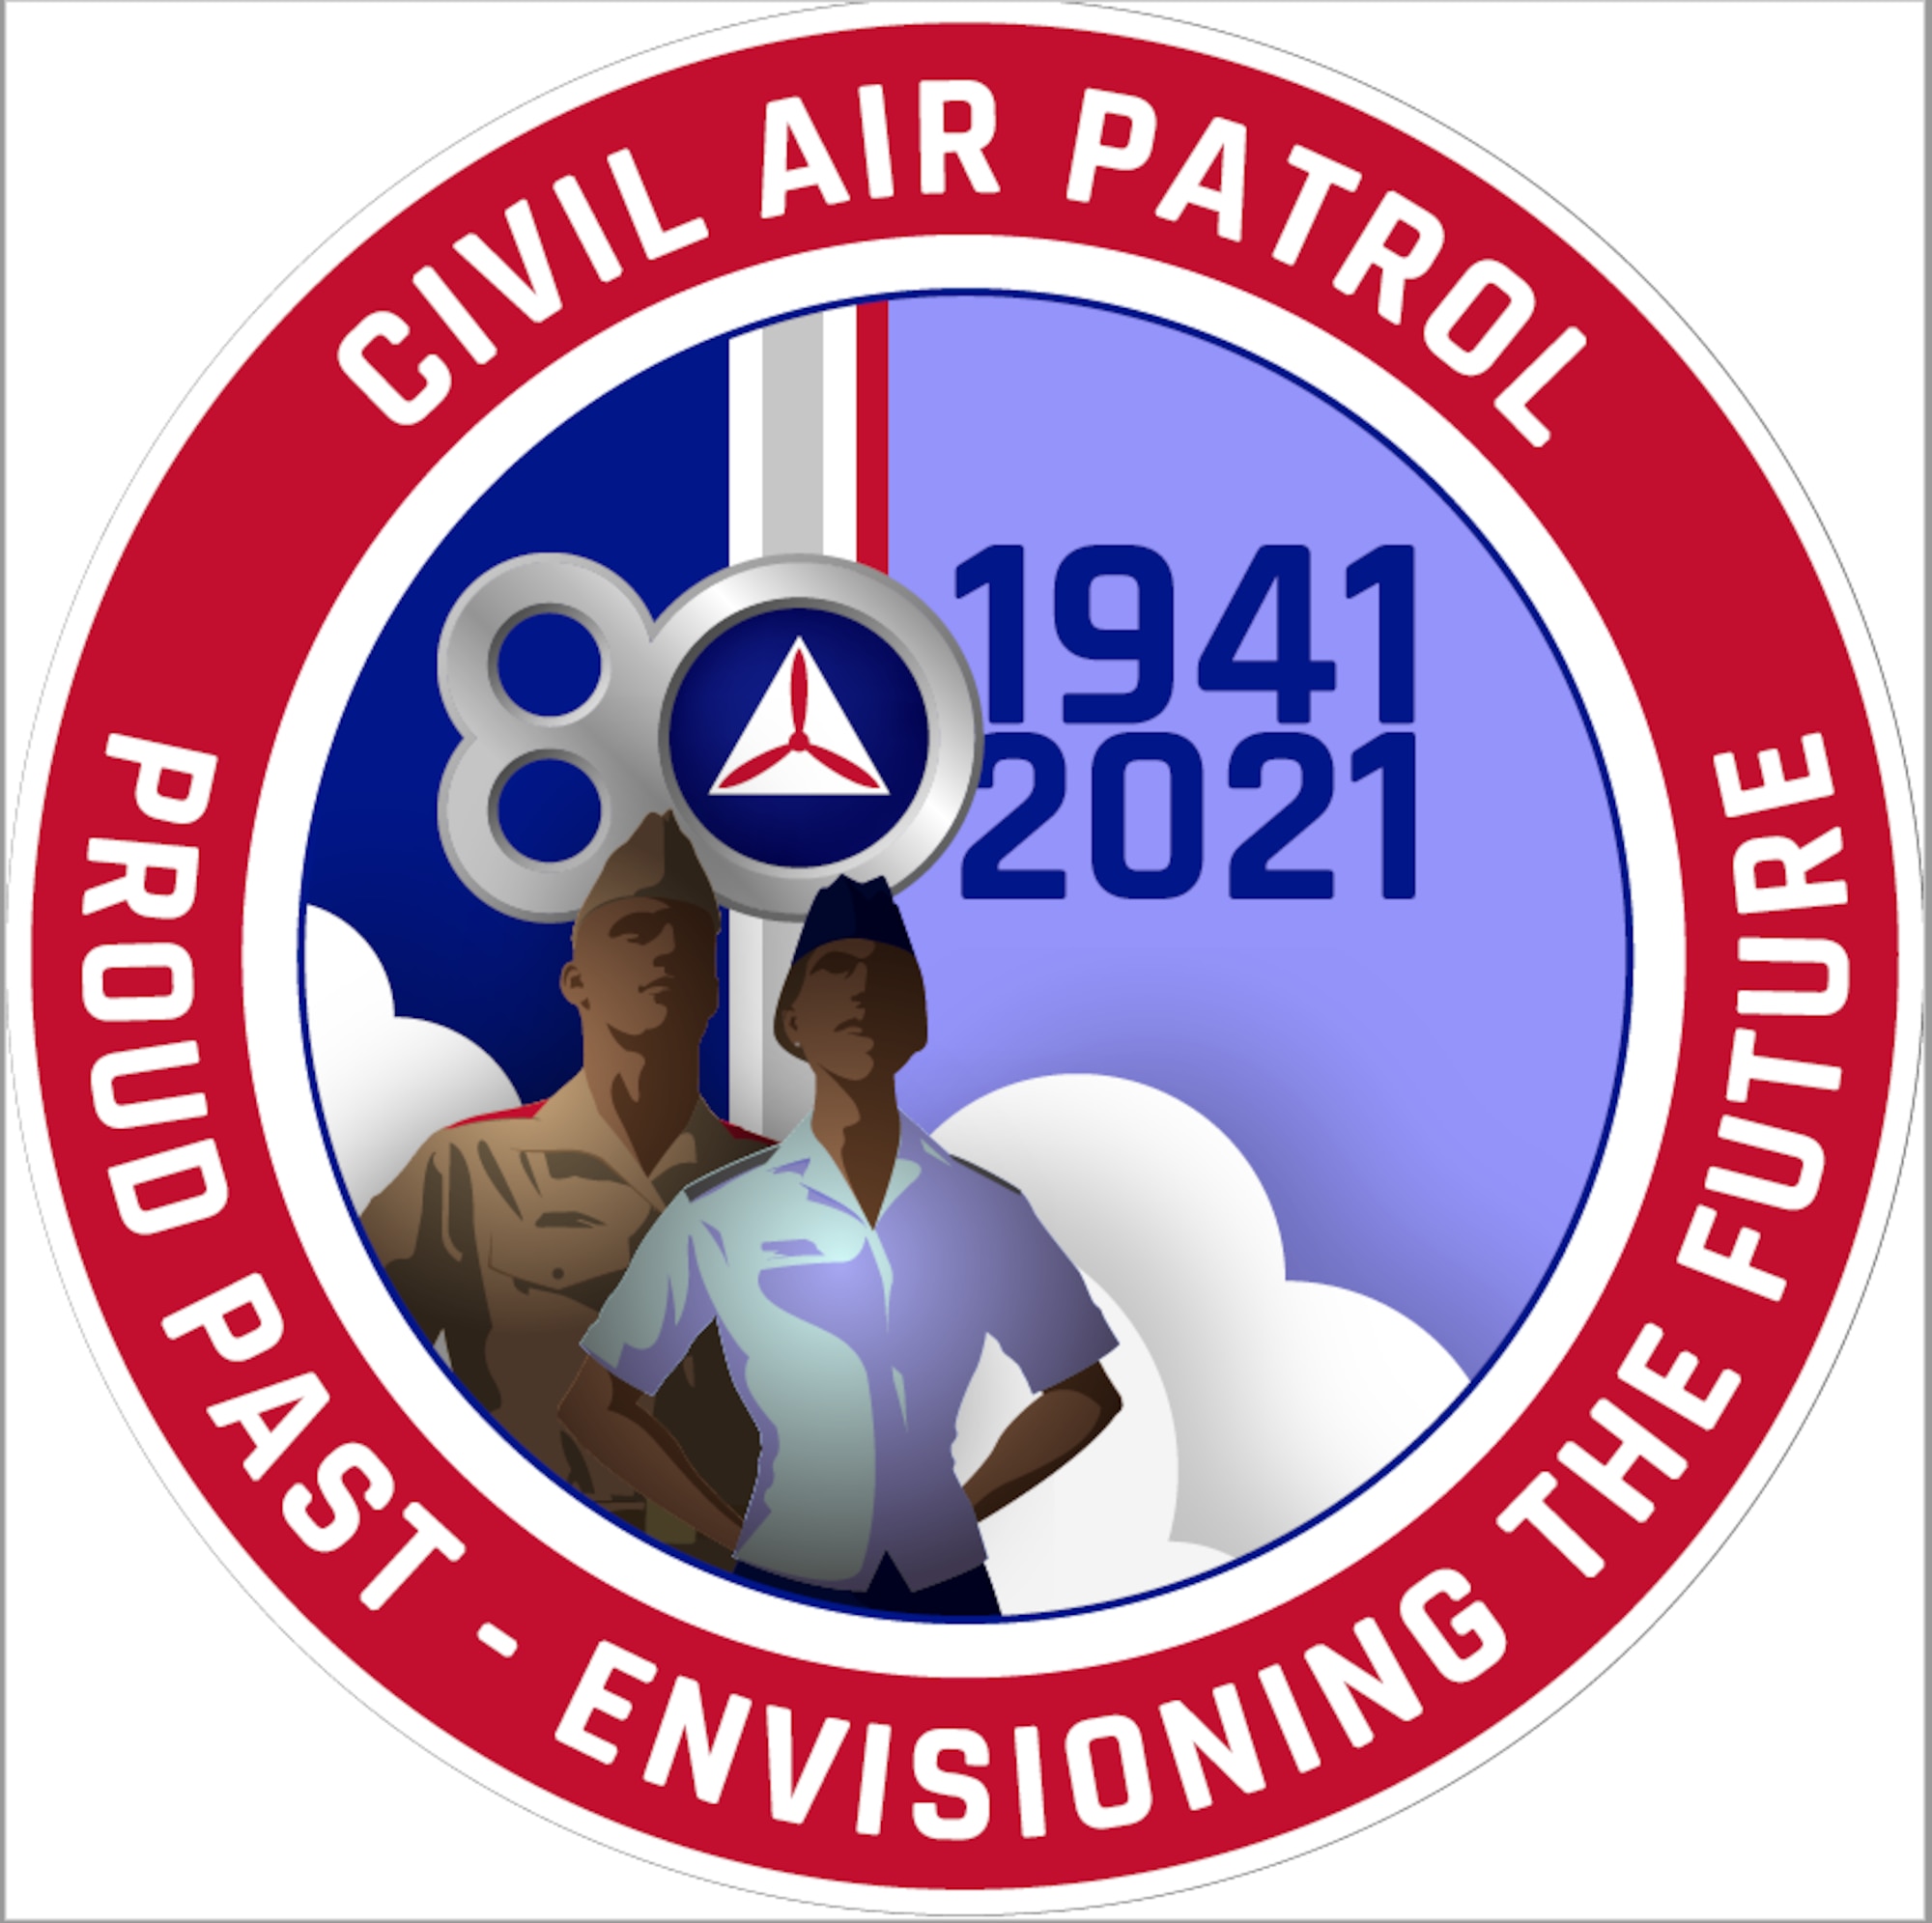 Vintage Civil Air Patrol Celebrates 80 years:  1941-2021, Proud Past - Envisioning the Future.  (Photo Courtesy of the Civil Air Patrol, 80th Birthday Recognition).